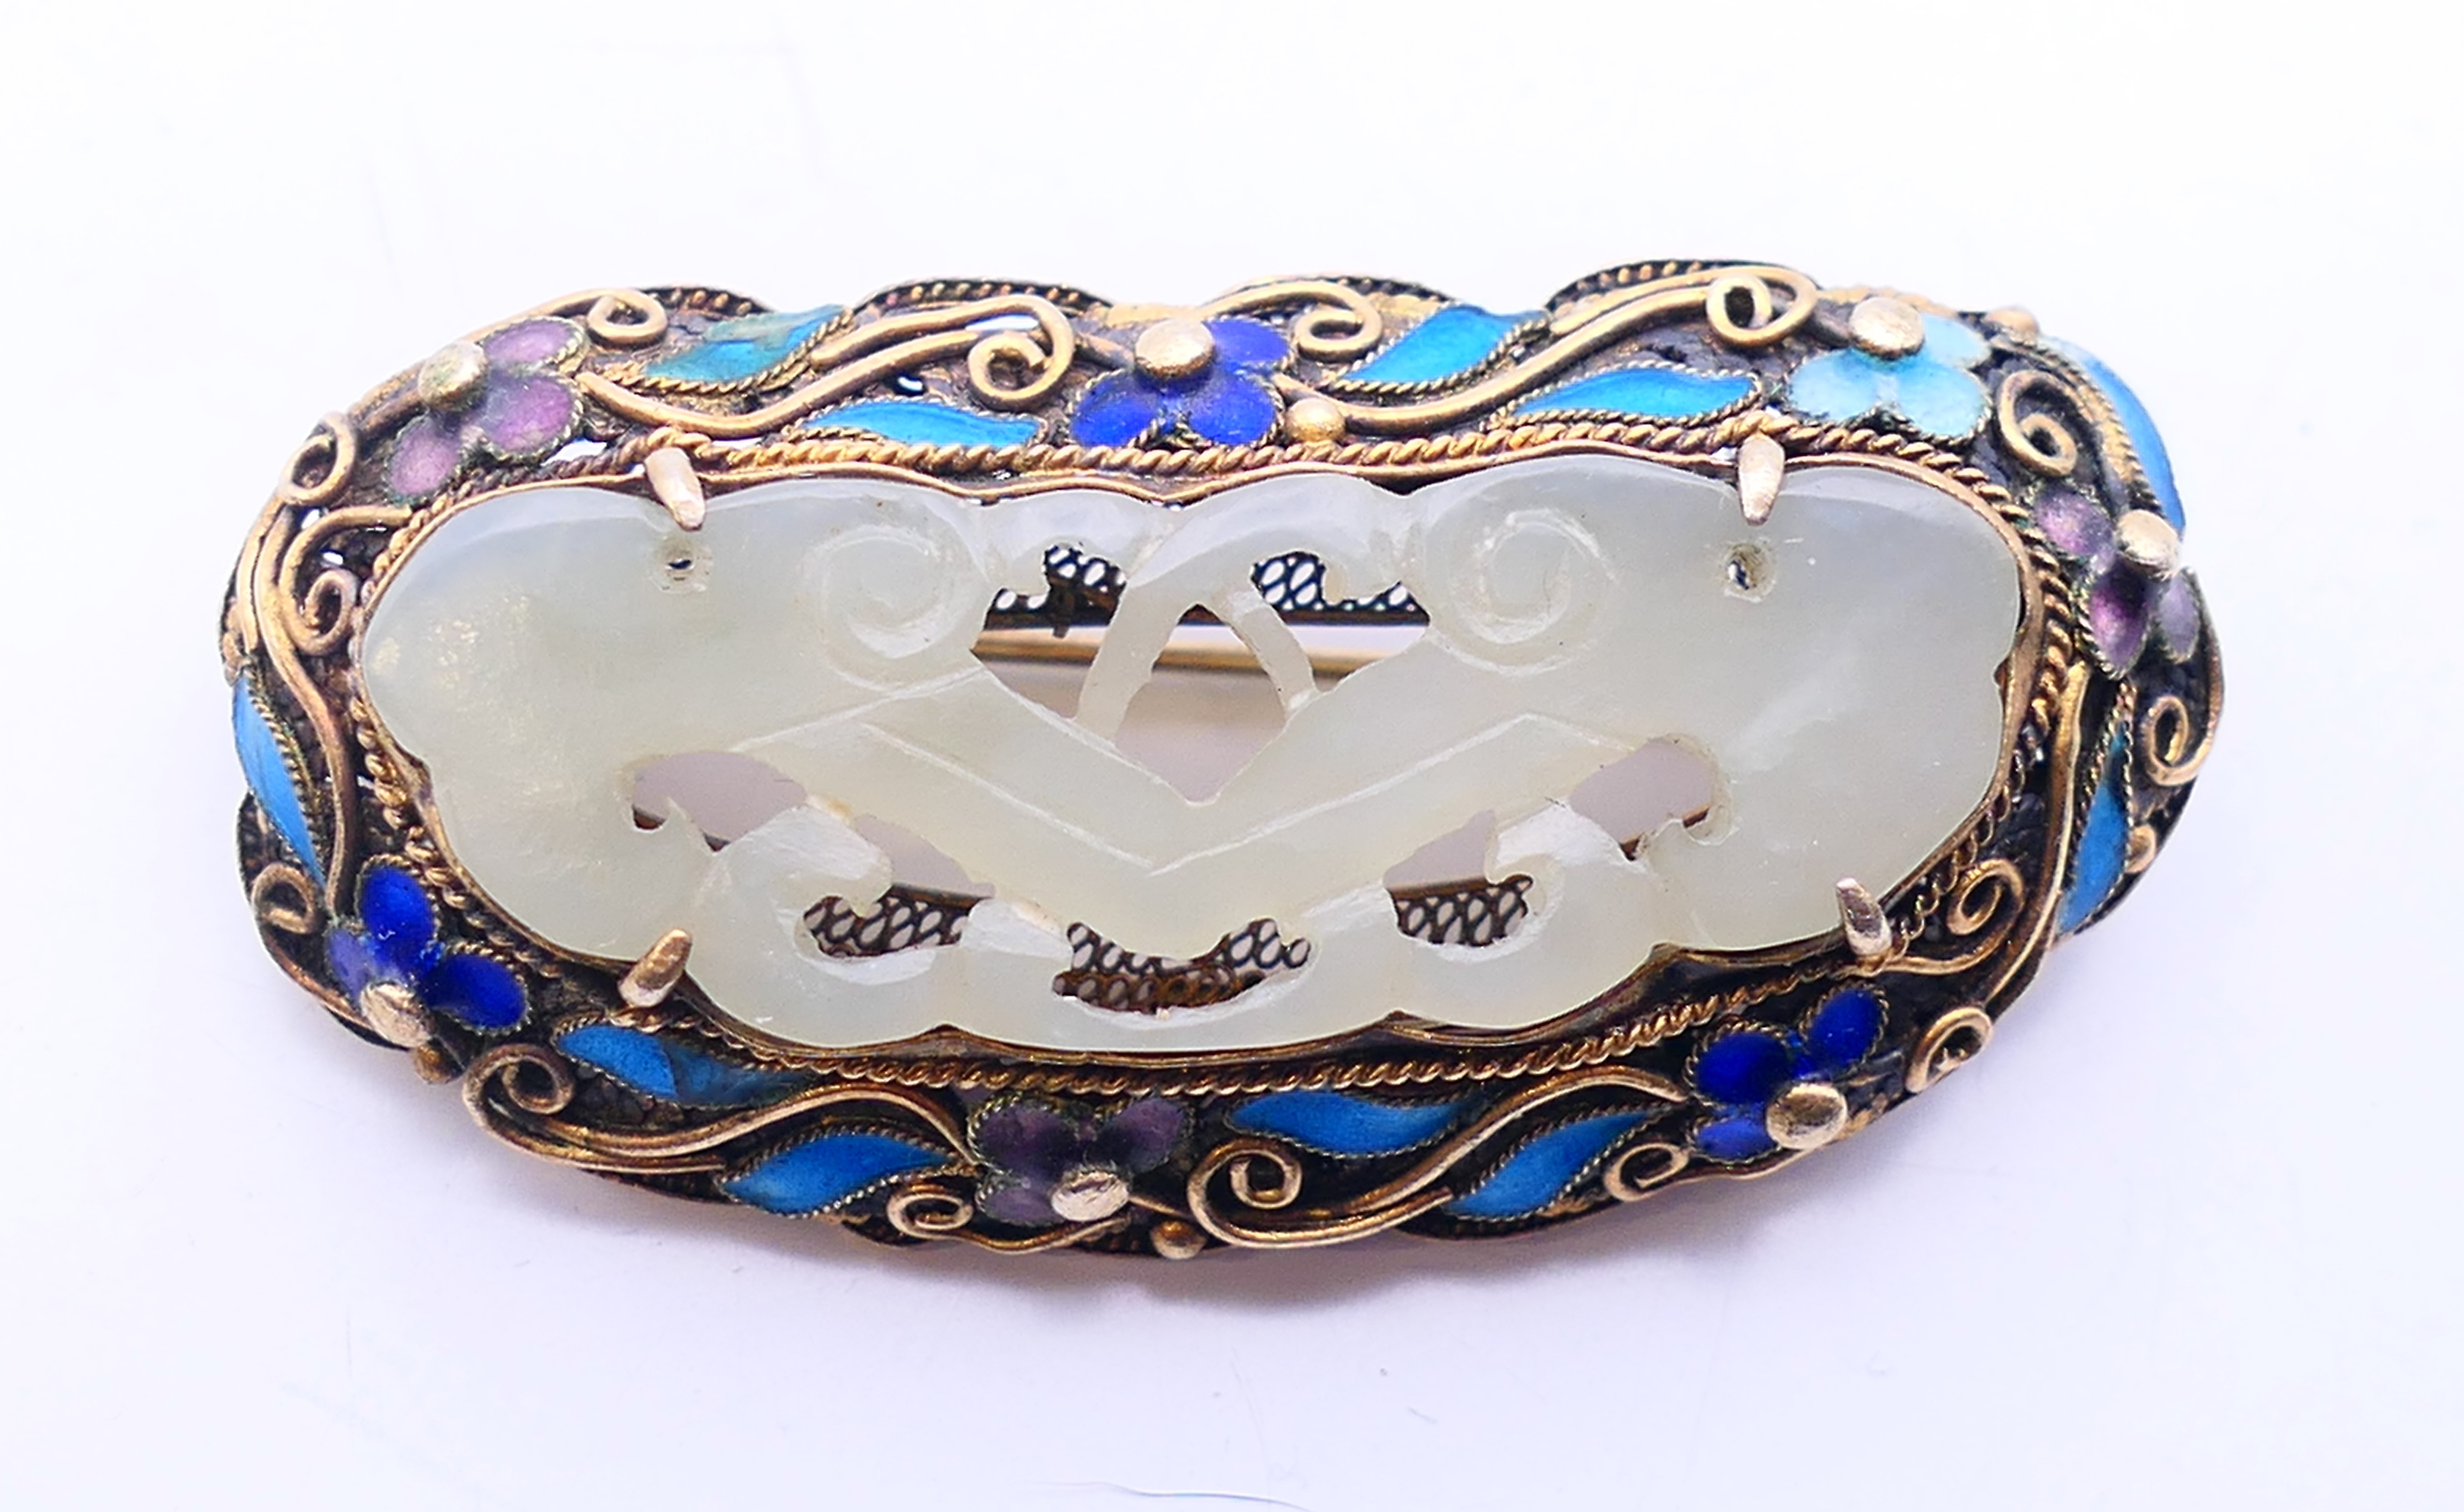 A Chinese silver, enamel and jade brooch. 5 cm x 2.5 cm.